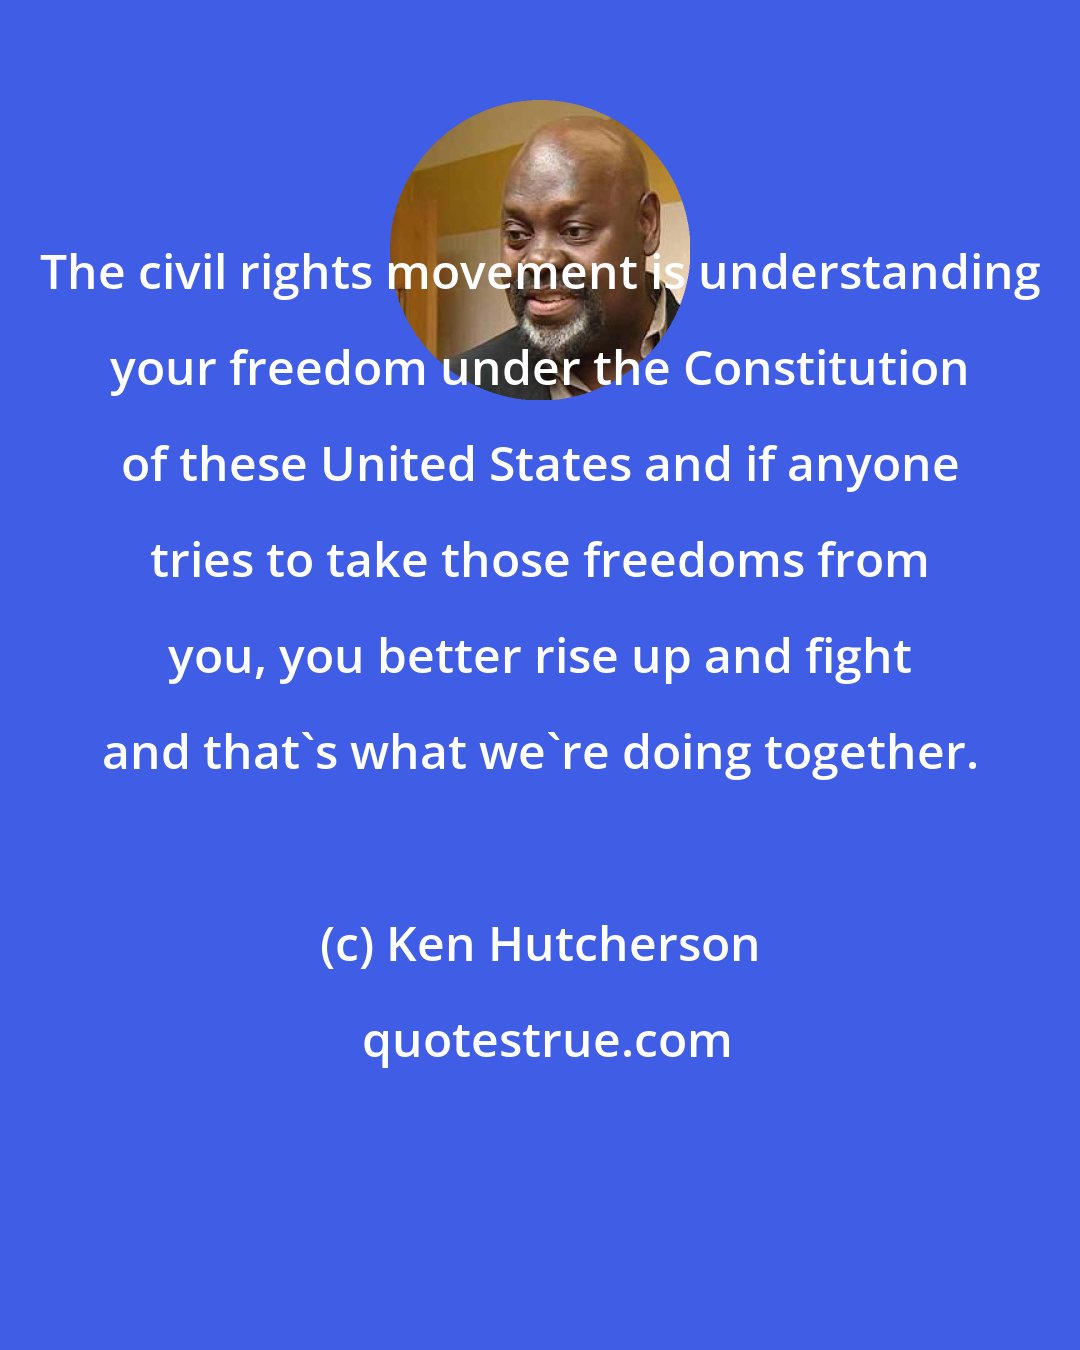 Ken Hutcherson: The civil rights movement is understanding your freedom under the Constitution of these United States and if anyone tries to take those freedoms from you, you better rise up and fight and that's what we're doing together.